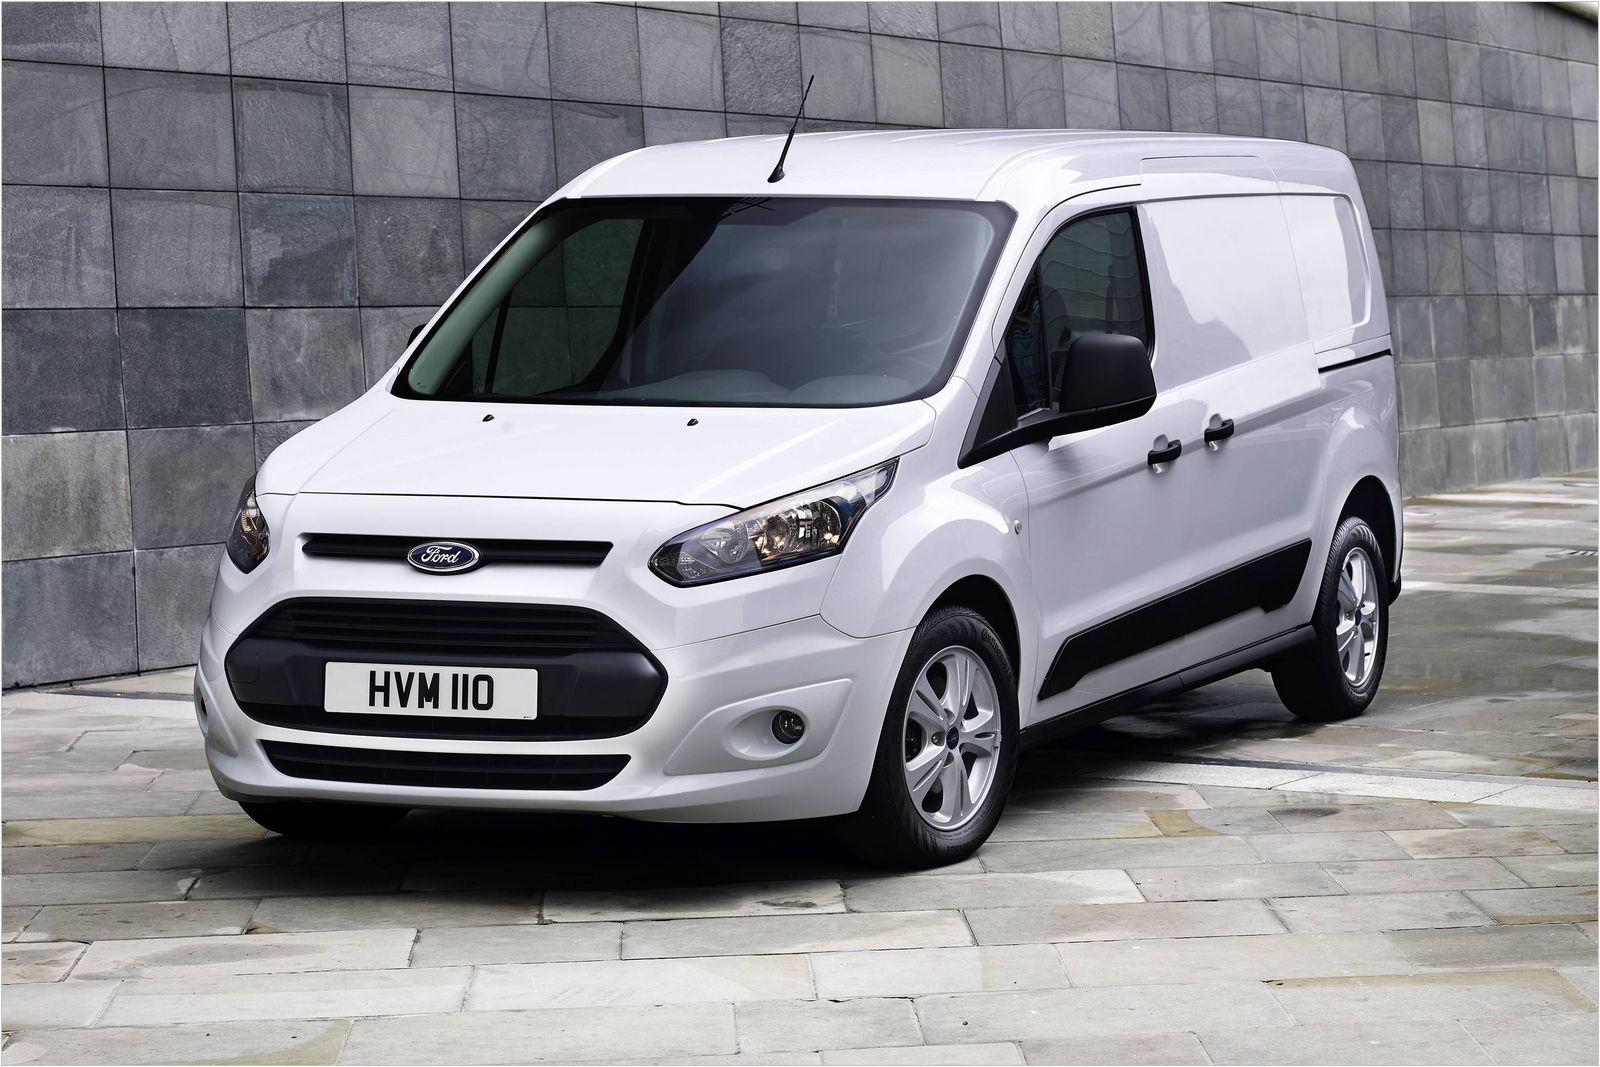 Ford Transit Connect, 1600x1067px, img-1